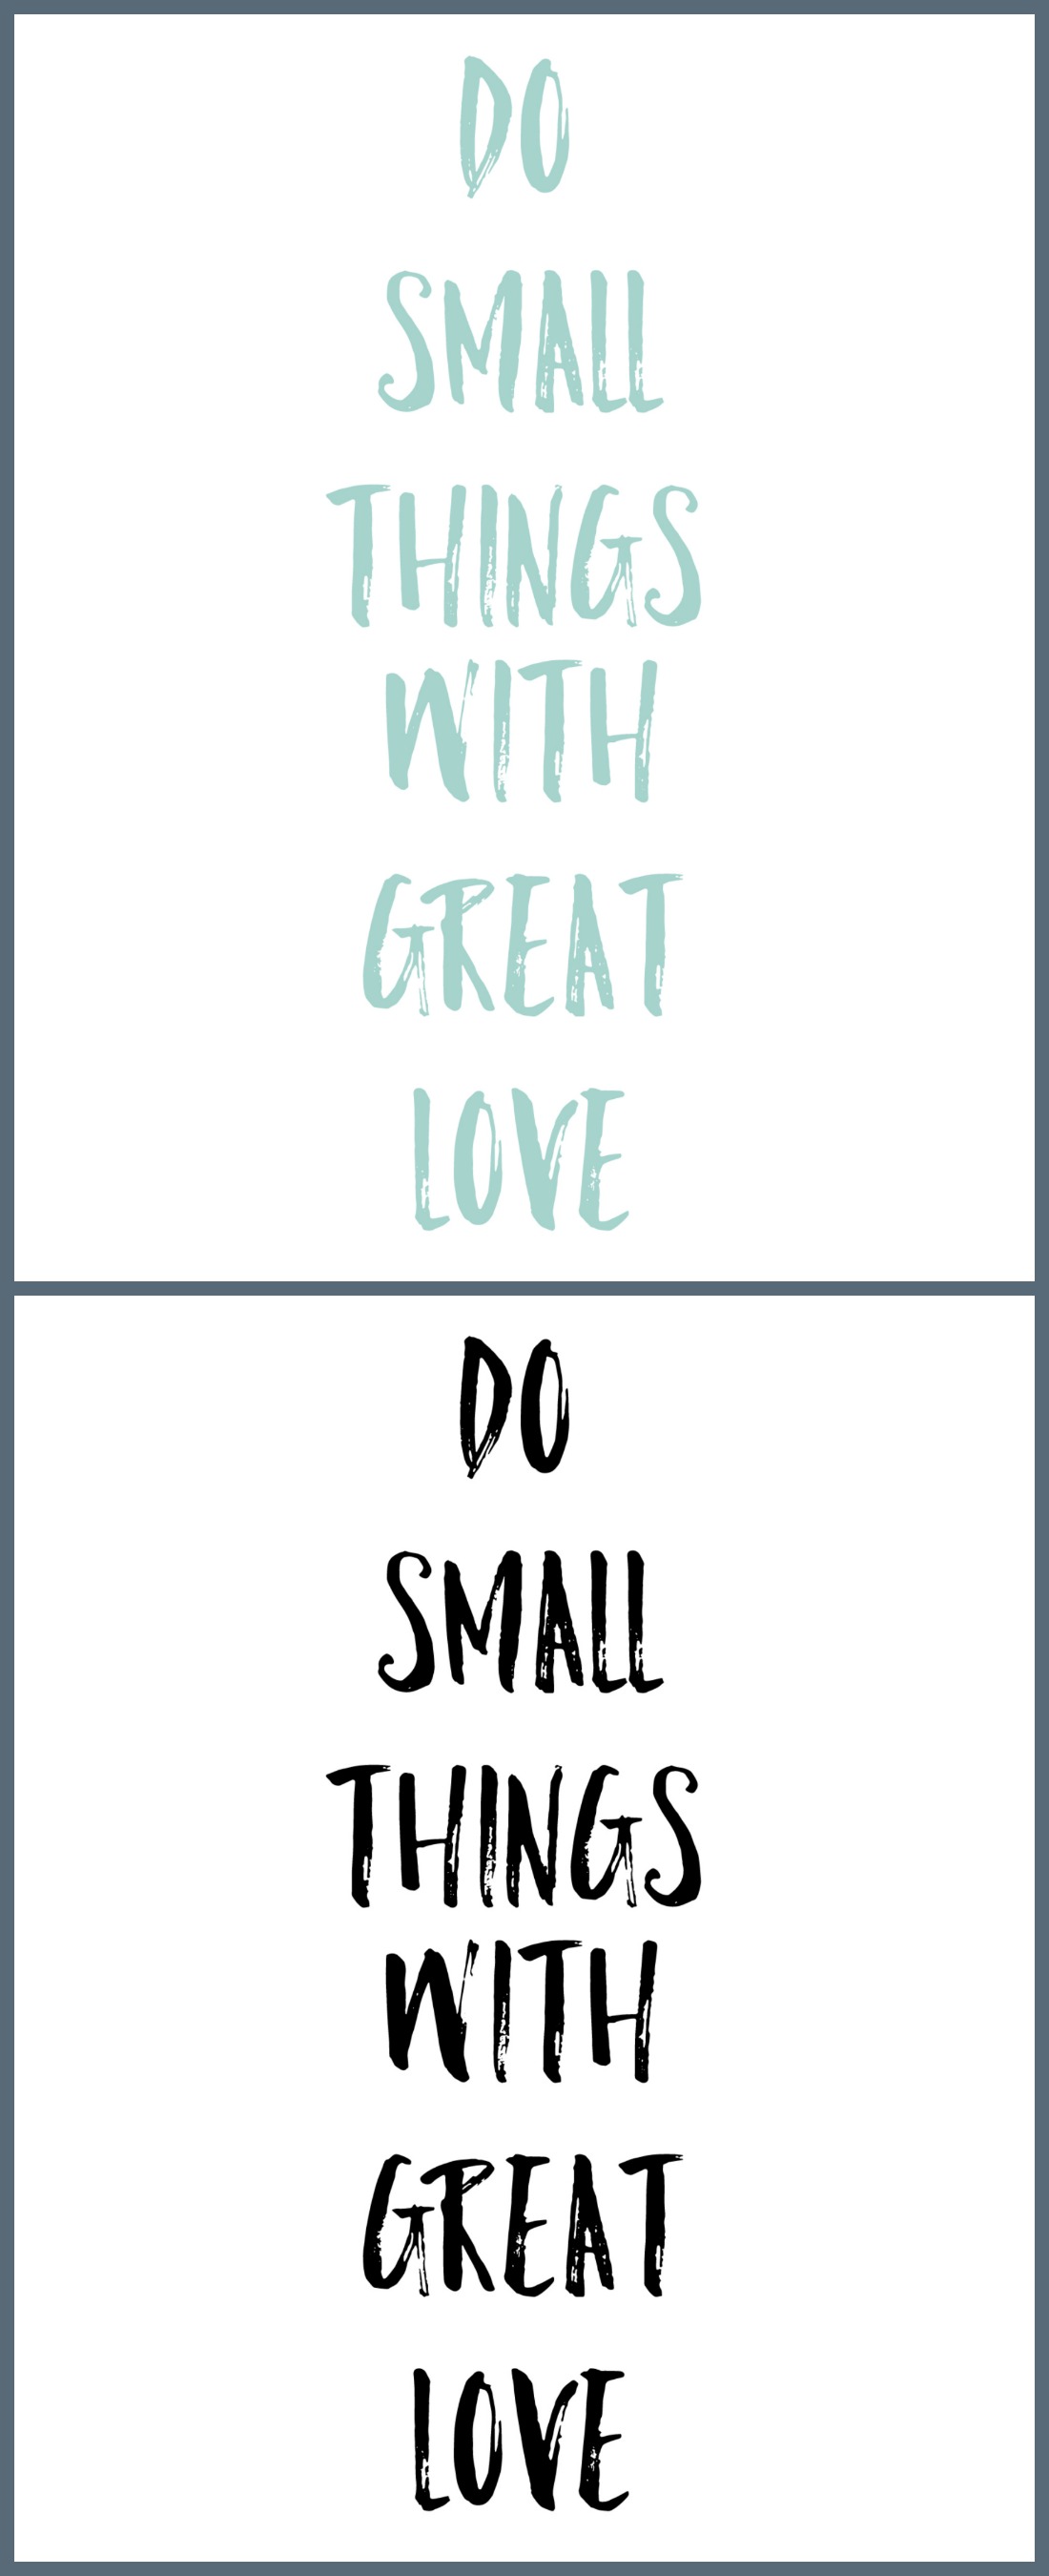 Do small things with great love FREE printable in dusty shale or grey. #printable #quote #wallart